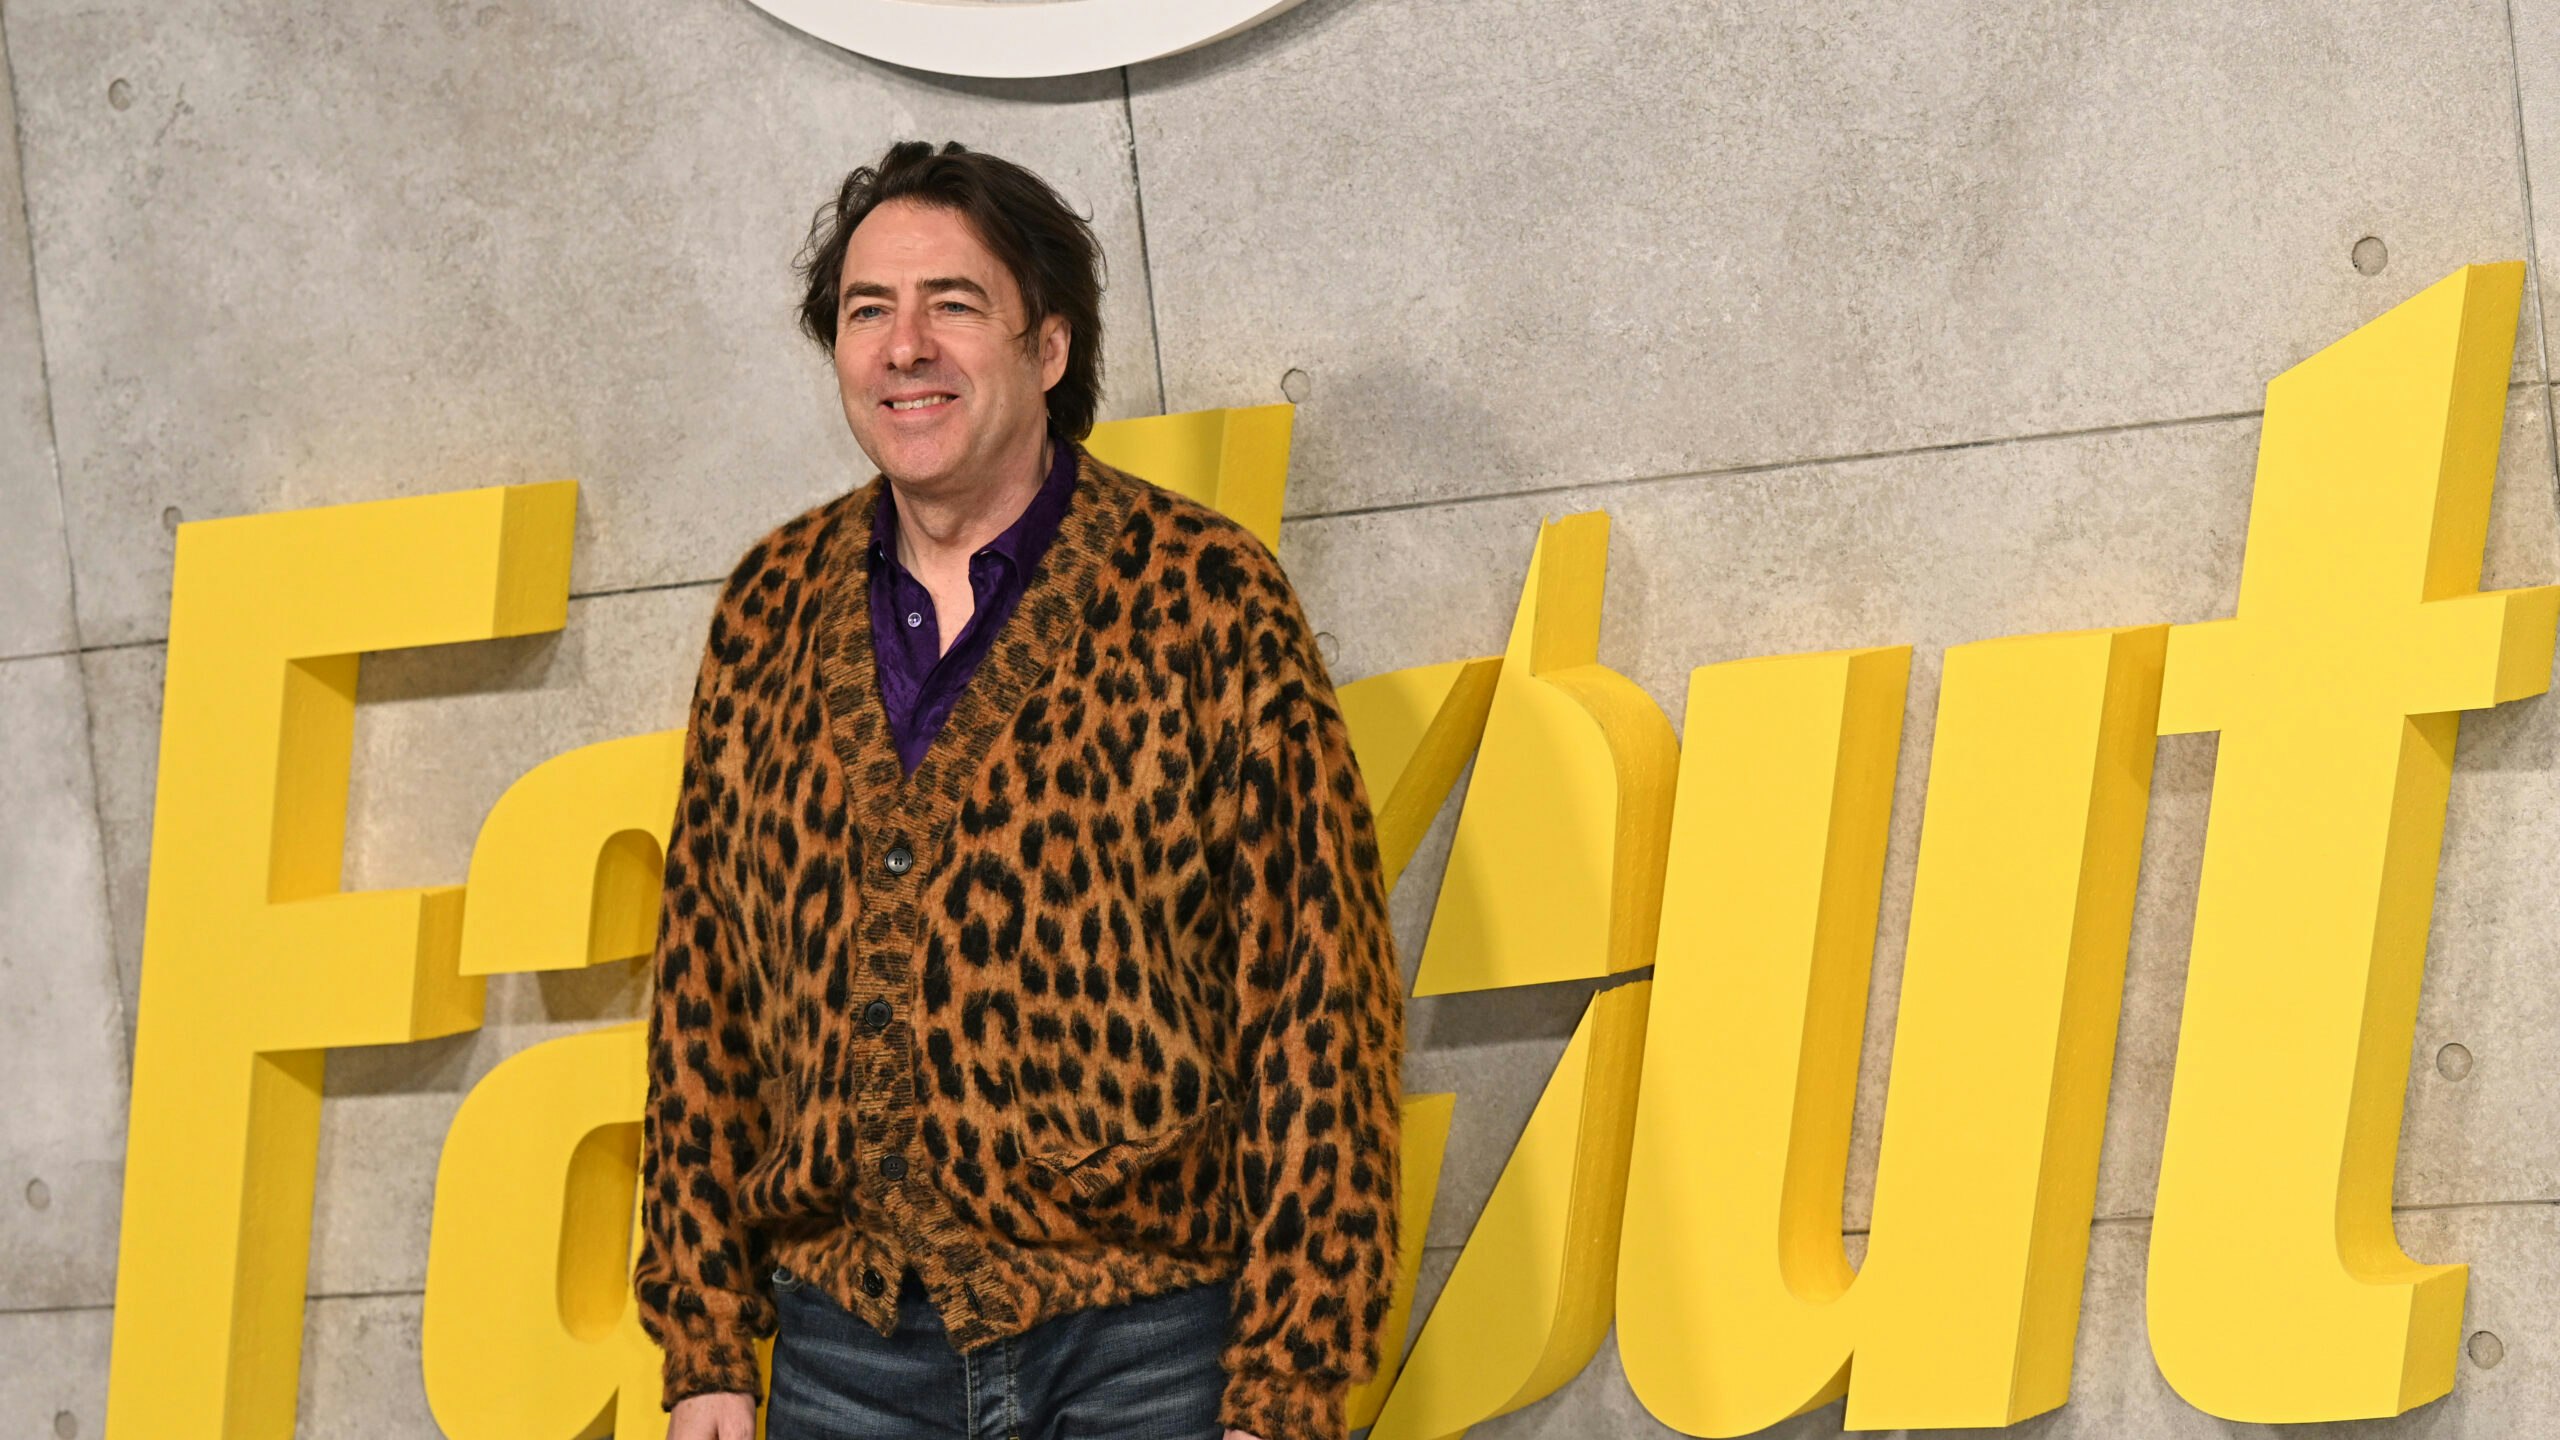 Jonathan Ross Says He Only Washes Once A Week – And He’s Not The Only Celeb With Strange Hygiene Habits